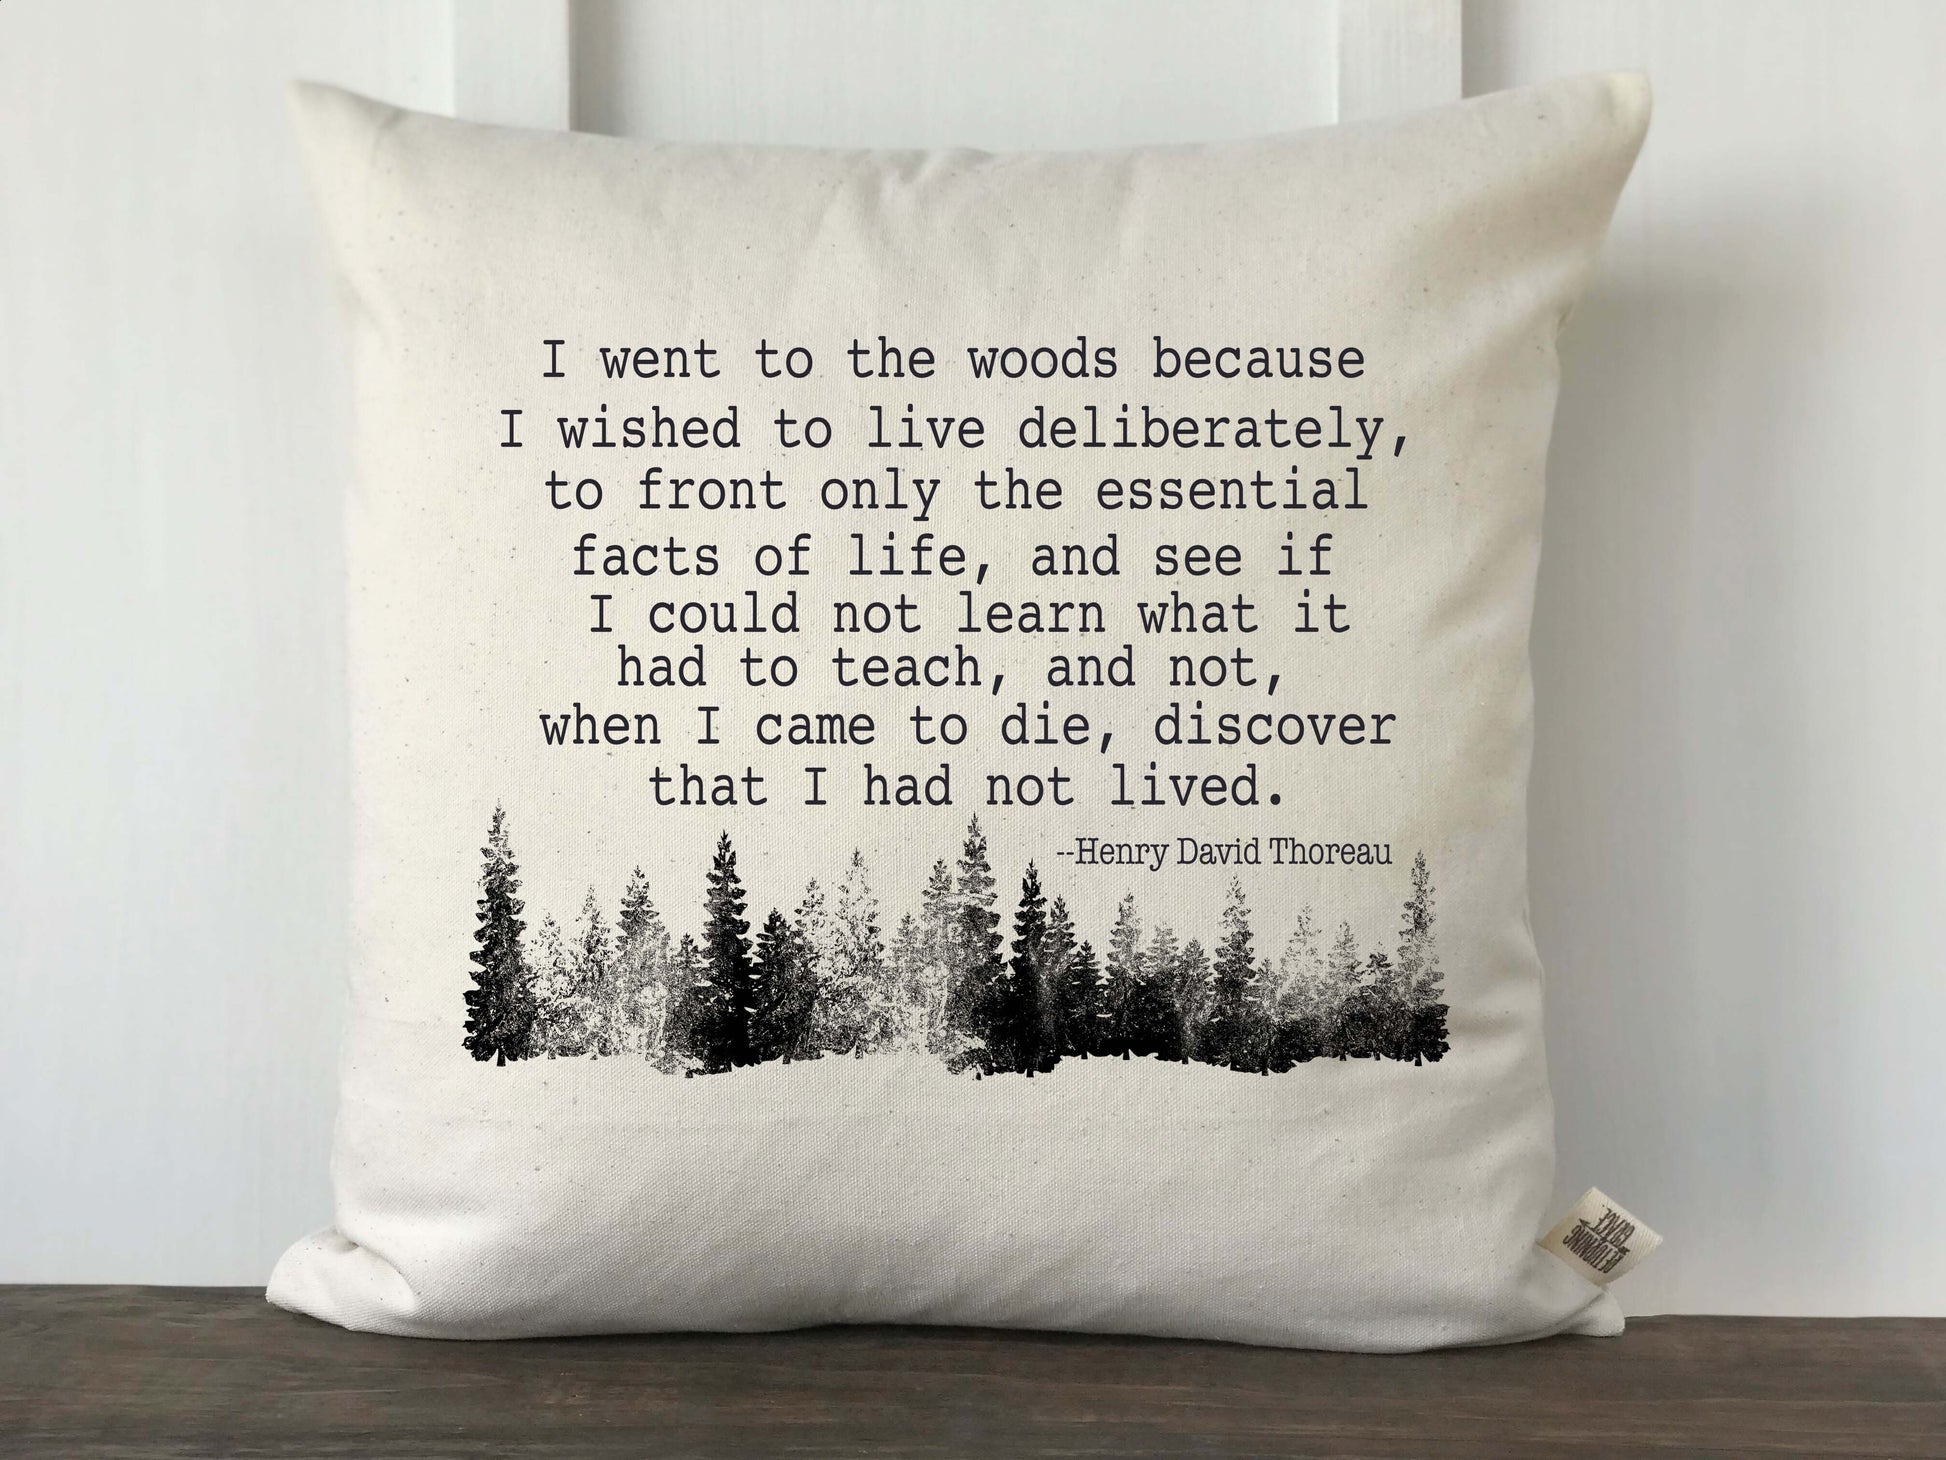 I Went to the Woods to Live Deliberately Pillow Cover - Returning Grace Designs